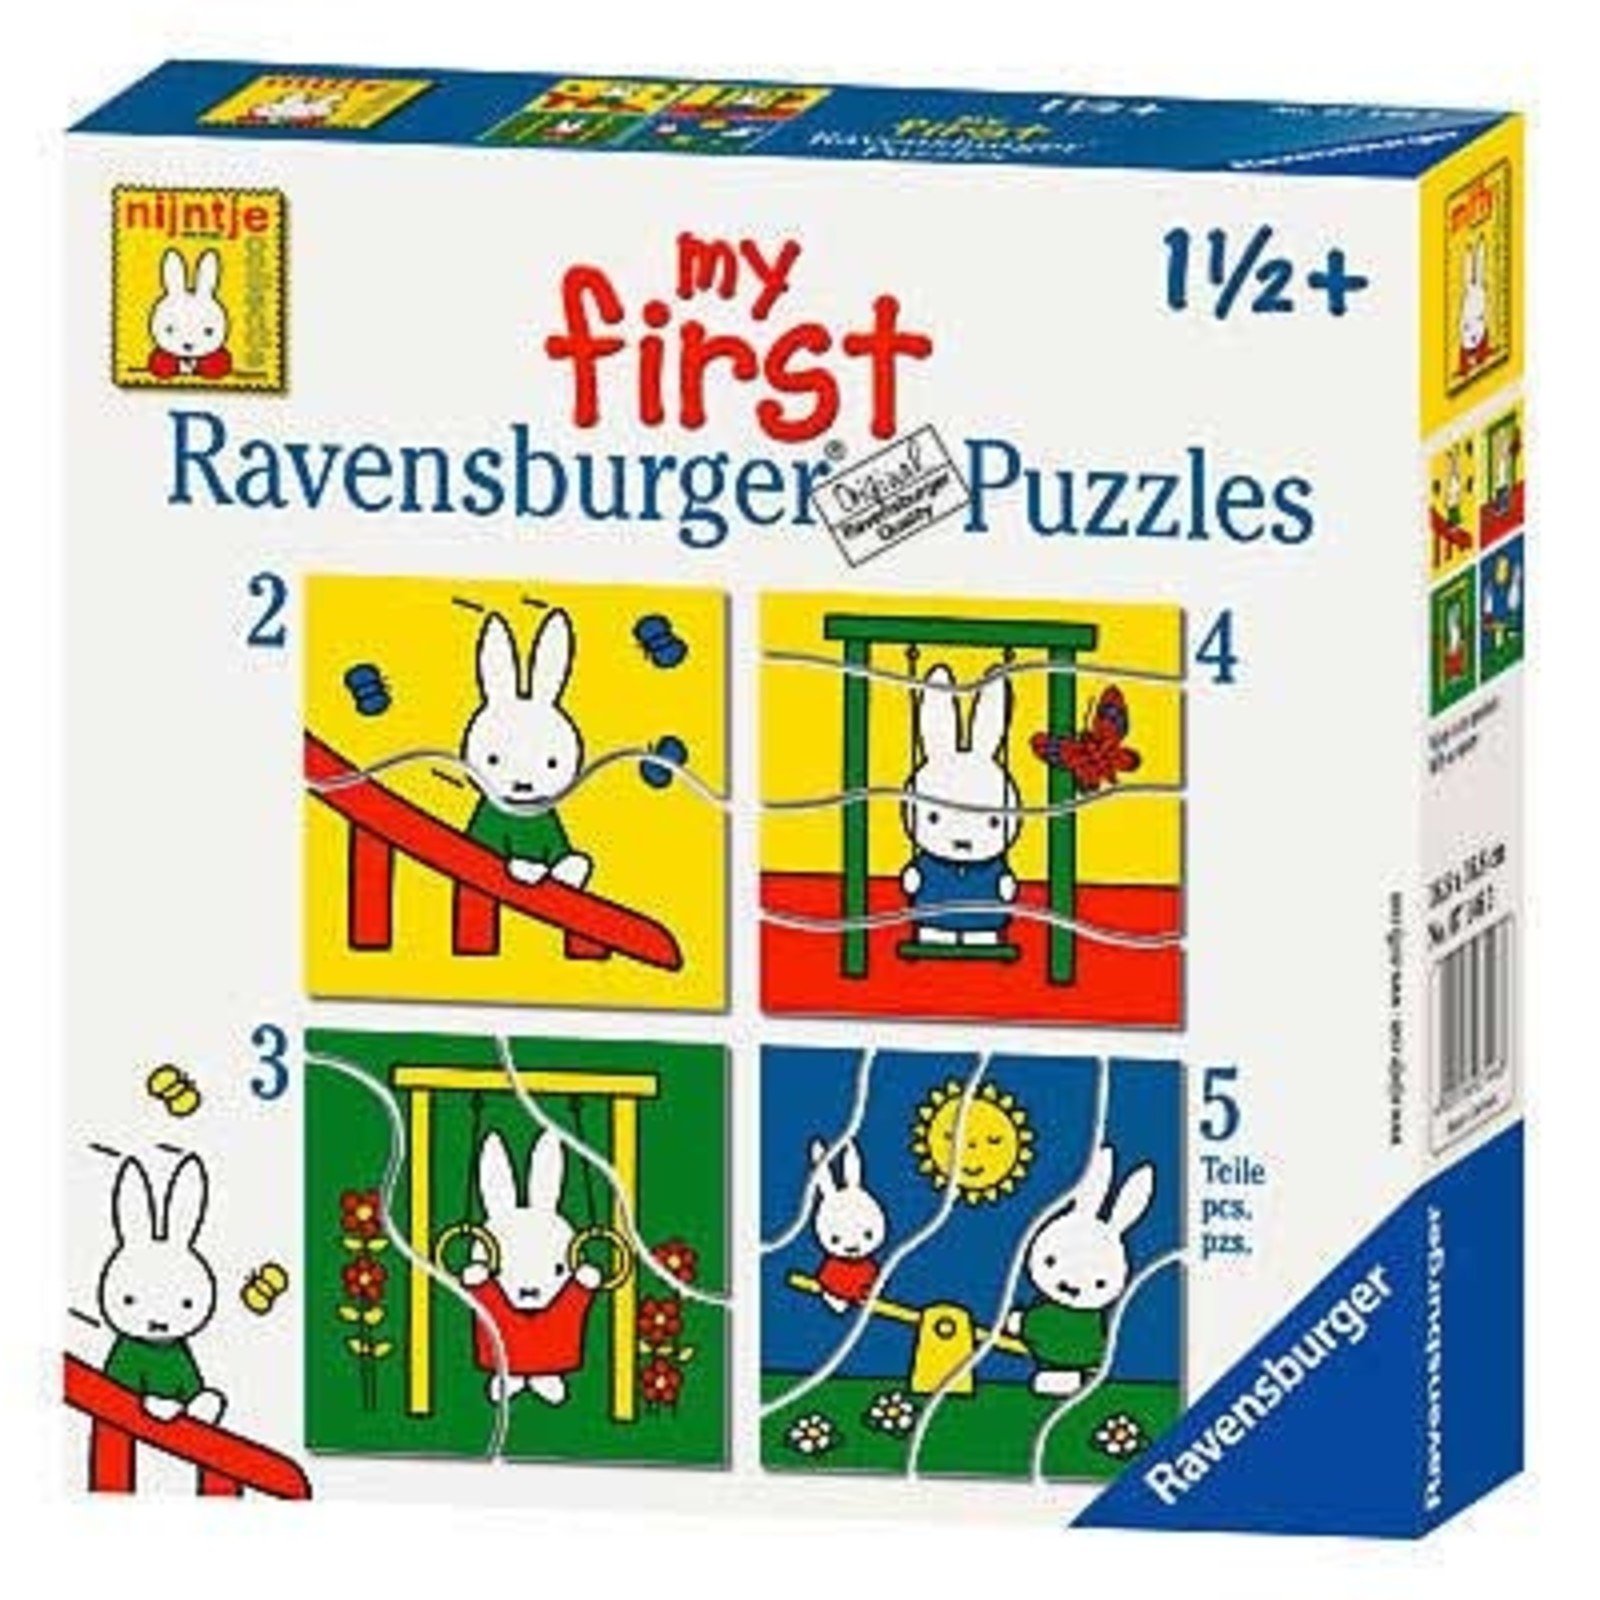 Puzzle 4 in 1 miffy playground